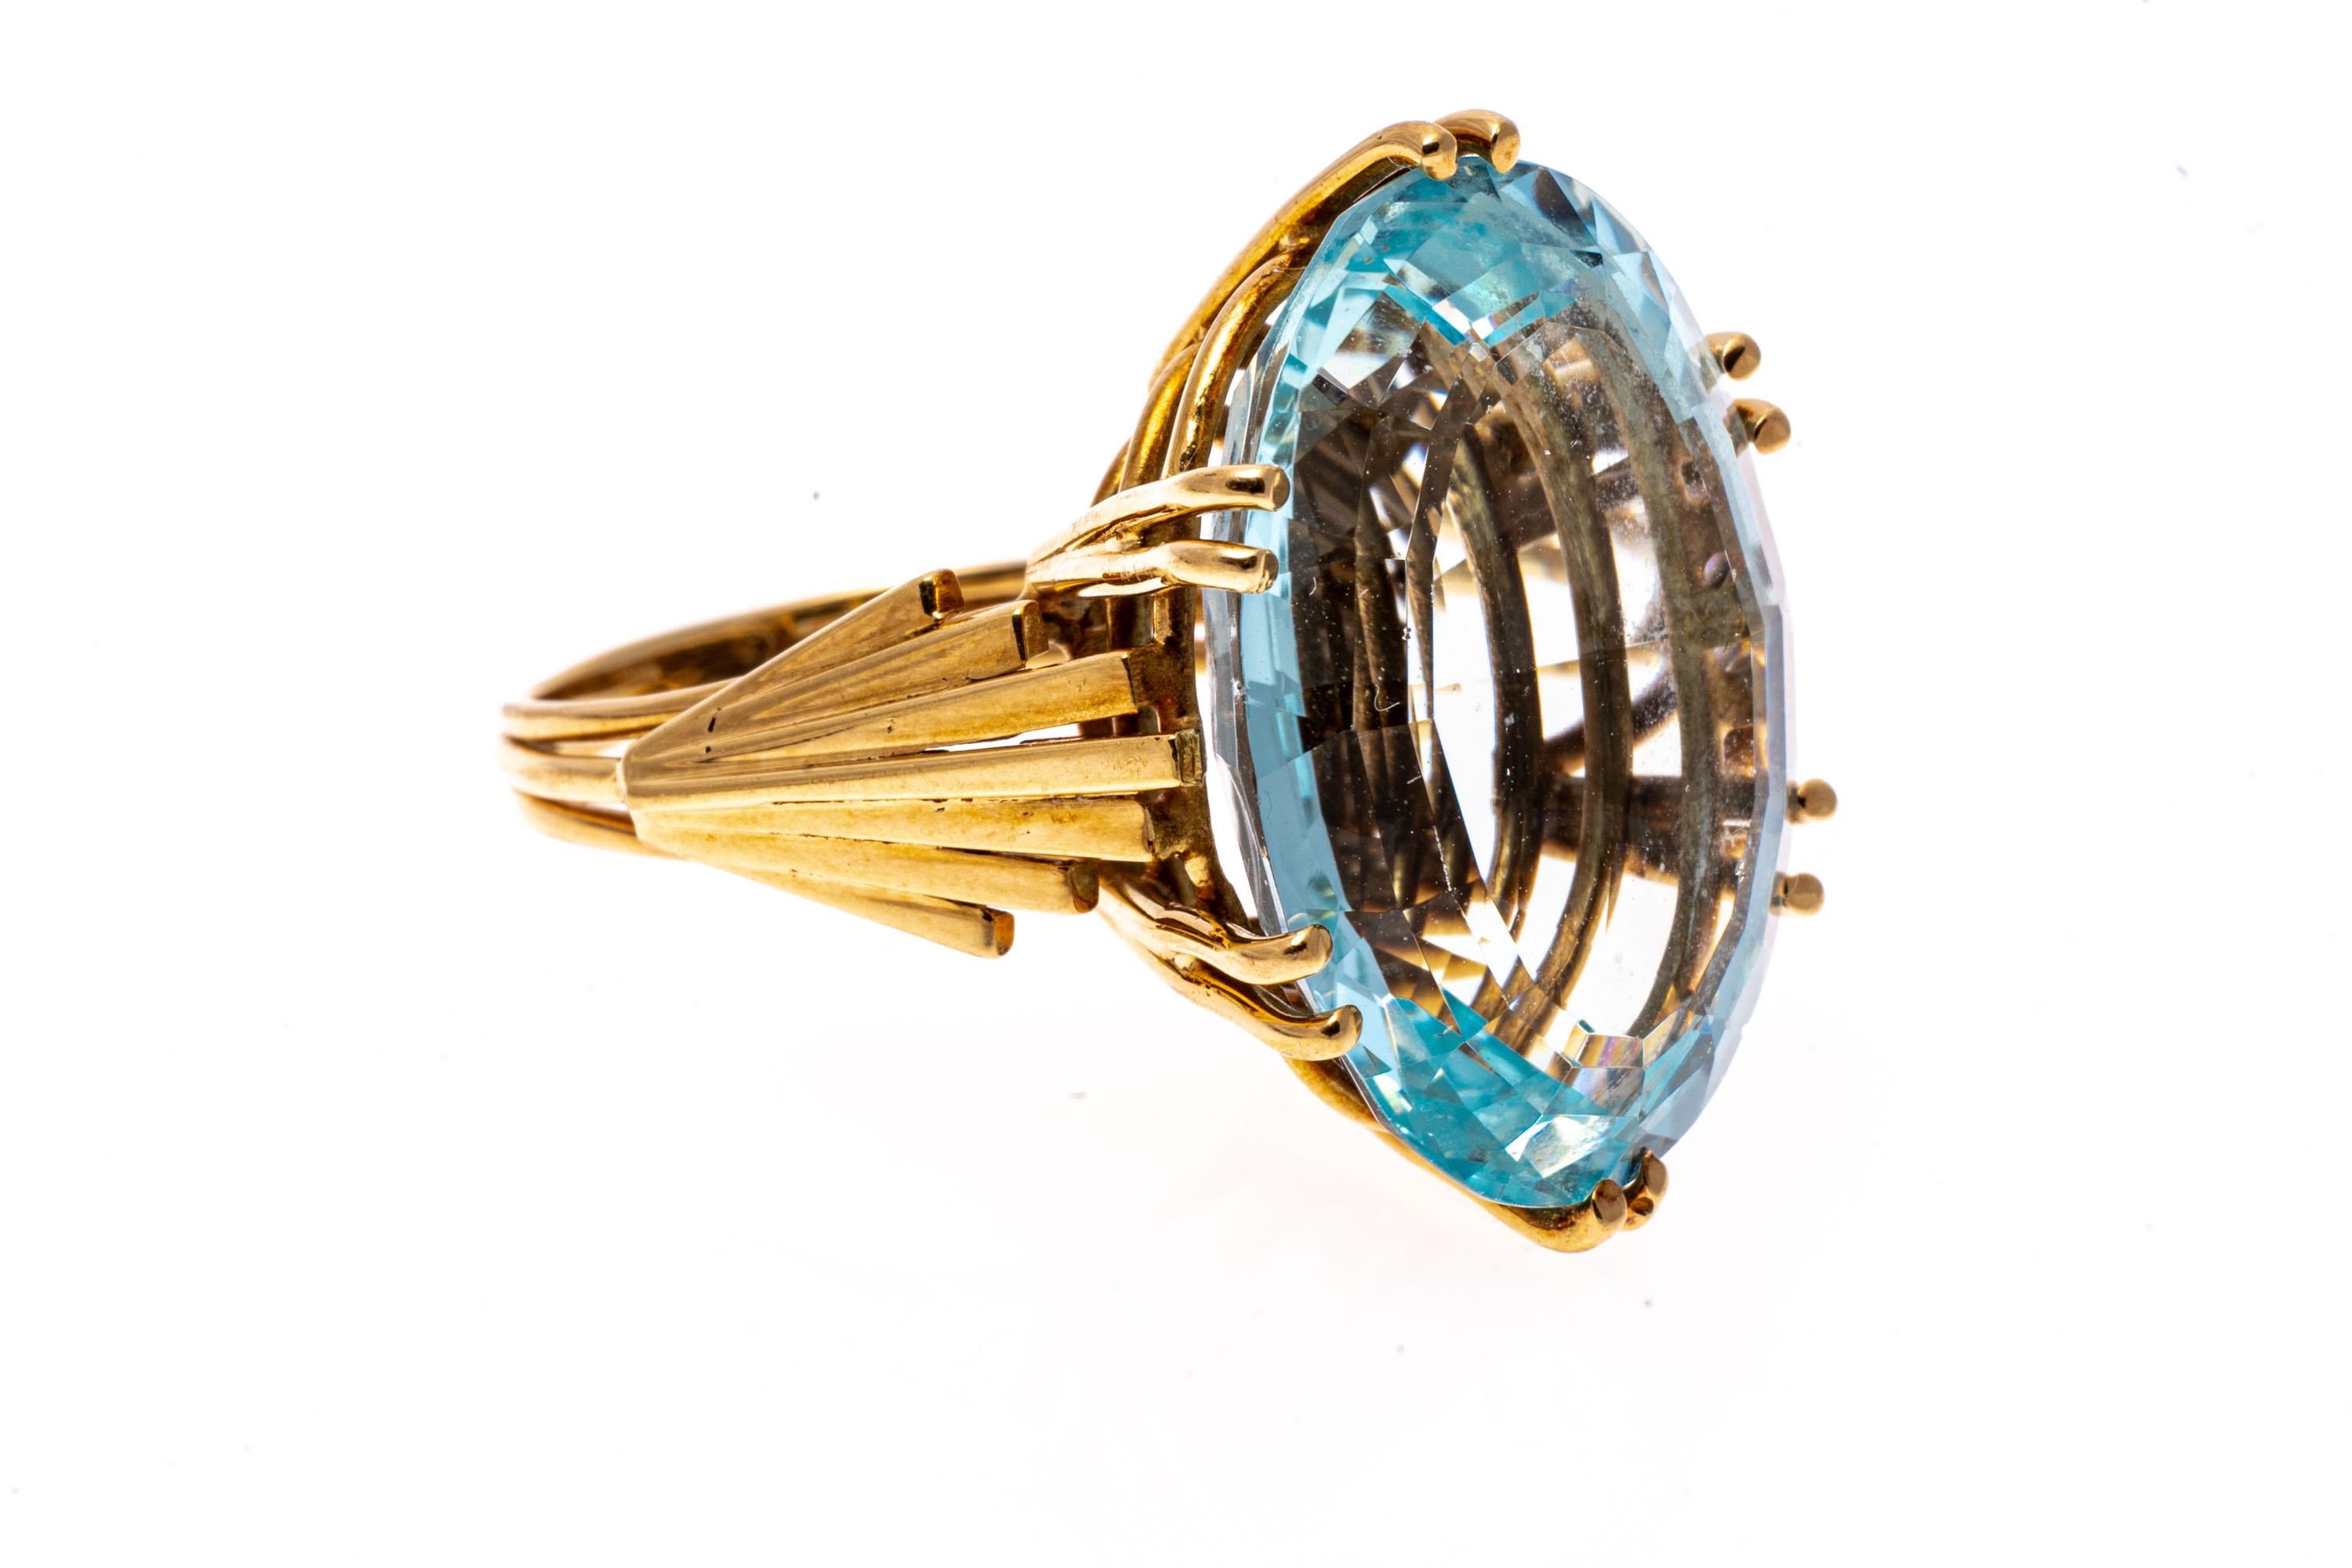 18k yellow gold ring. This elegant ring has a very retro look, with a large center oval cut, pale blue color aquamarine, approximately 16.36 CTS. The center stone is set with six split prongs, and is decorated with Deco-style fan shoulders which